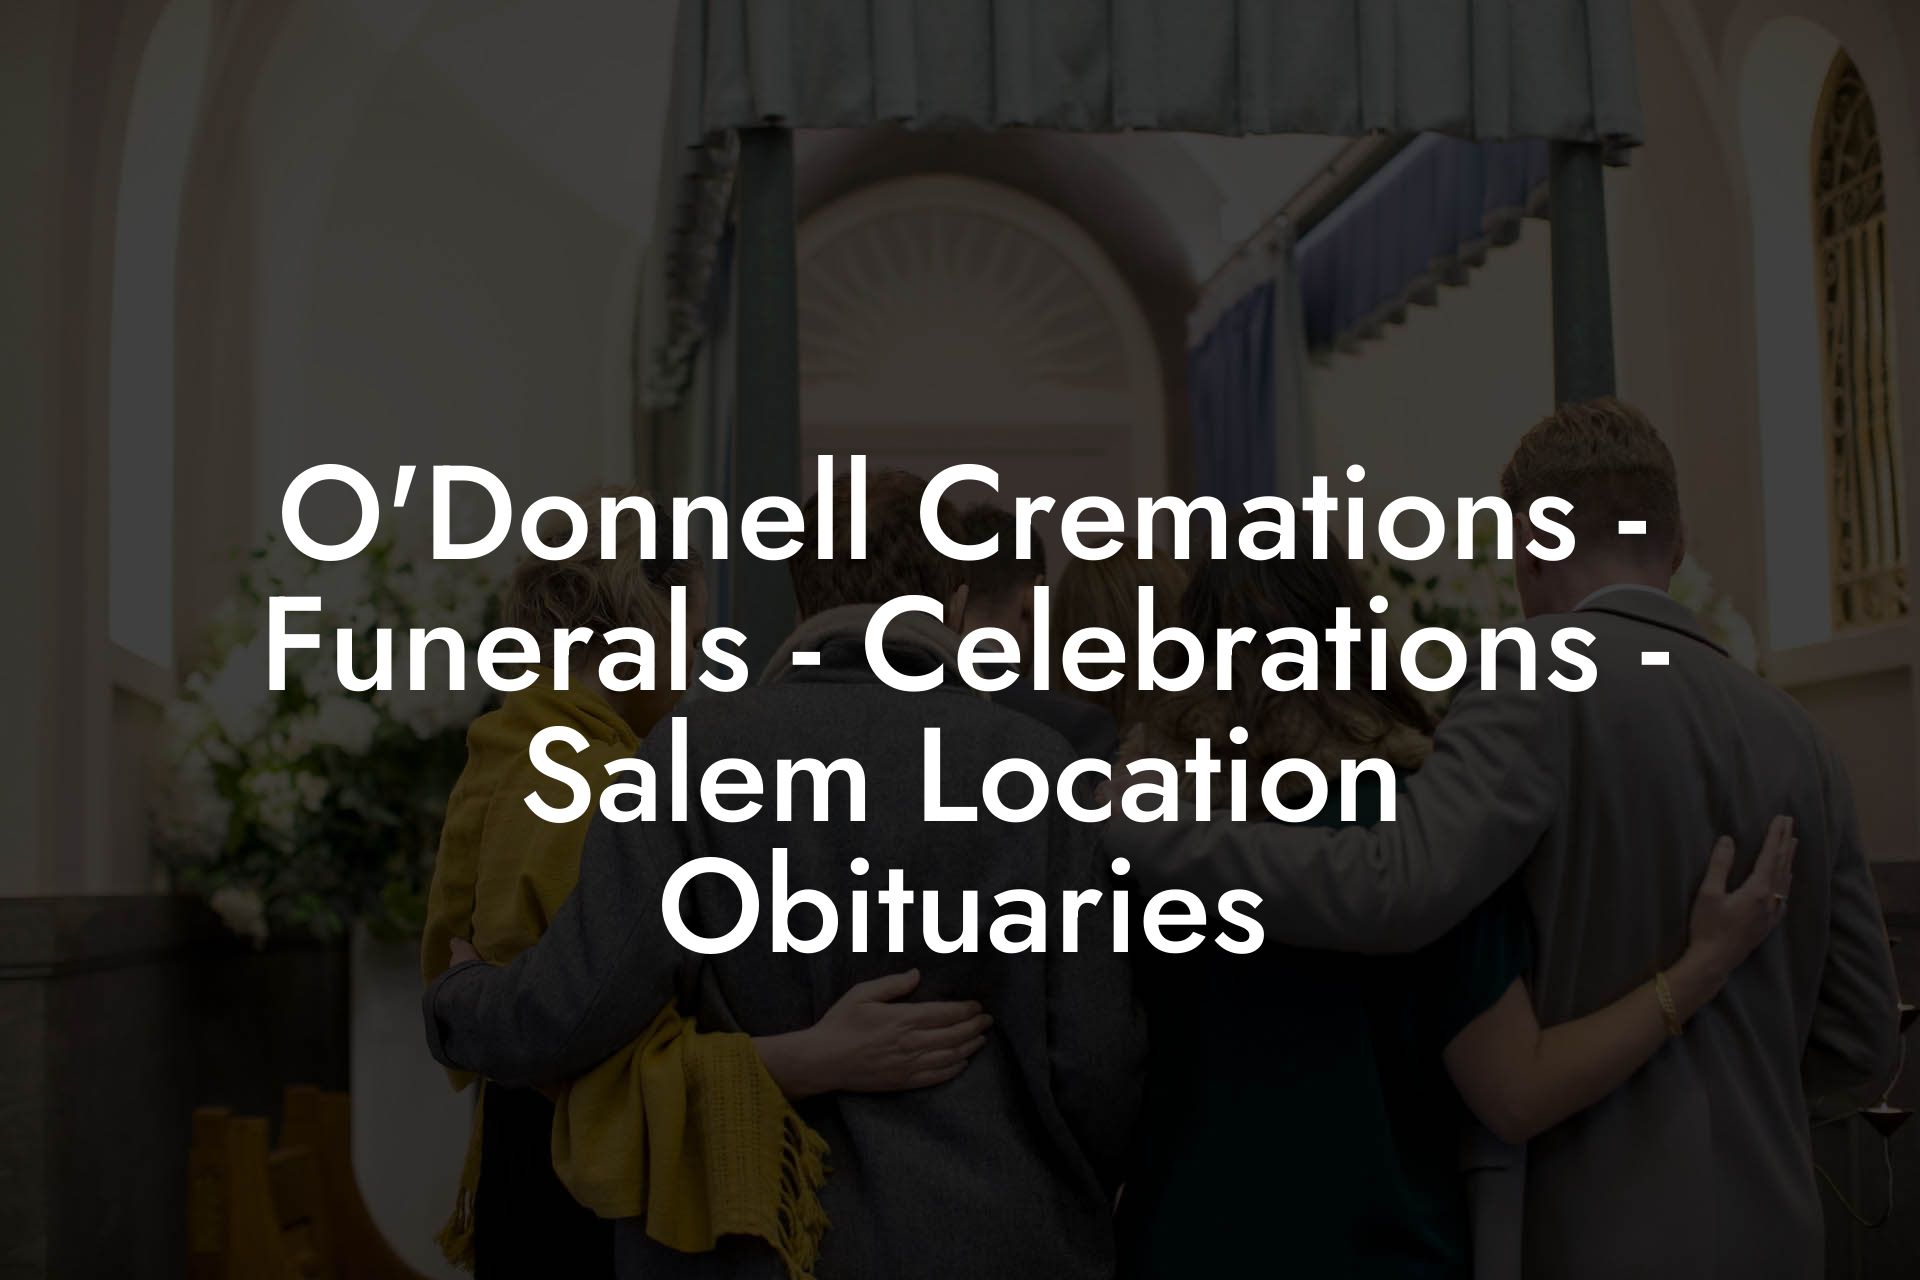 O'Donnell Cremations - Funerals - Celebrations - Salem Location Obituaries